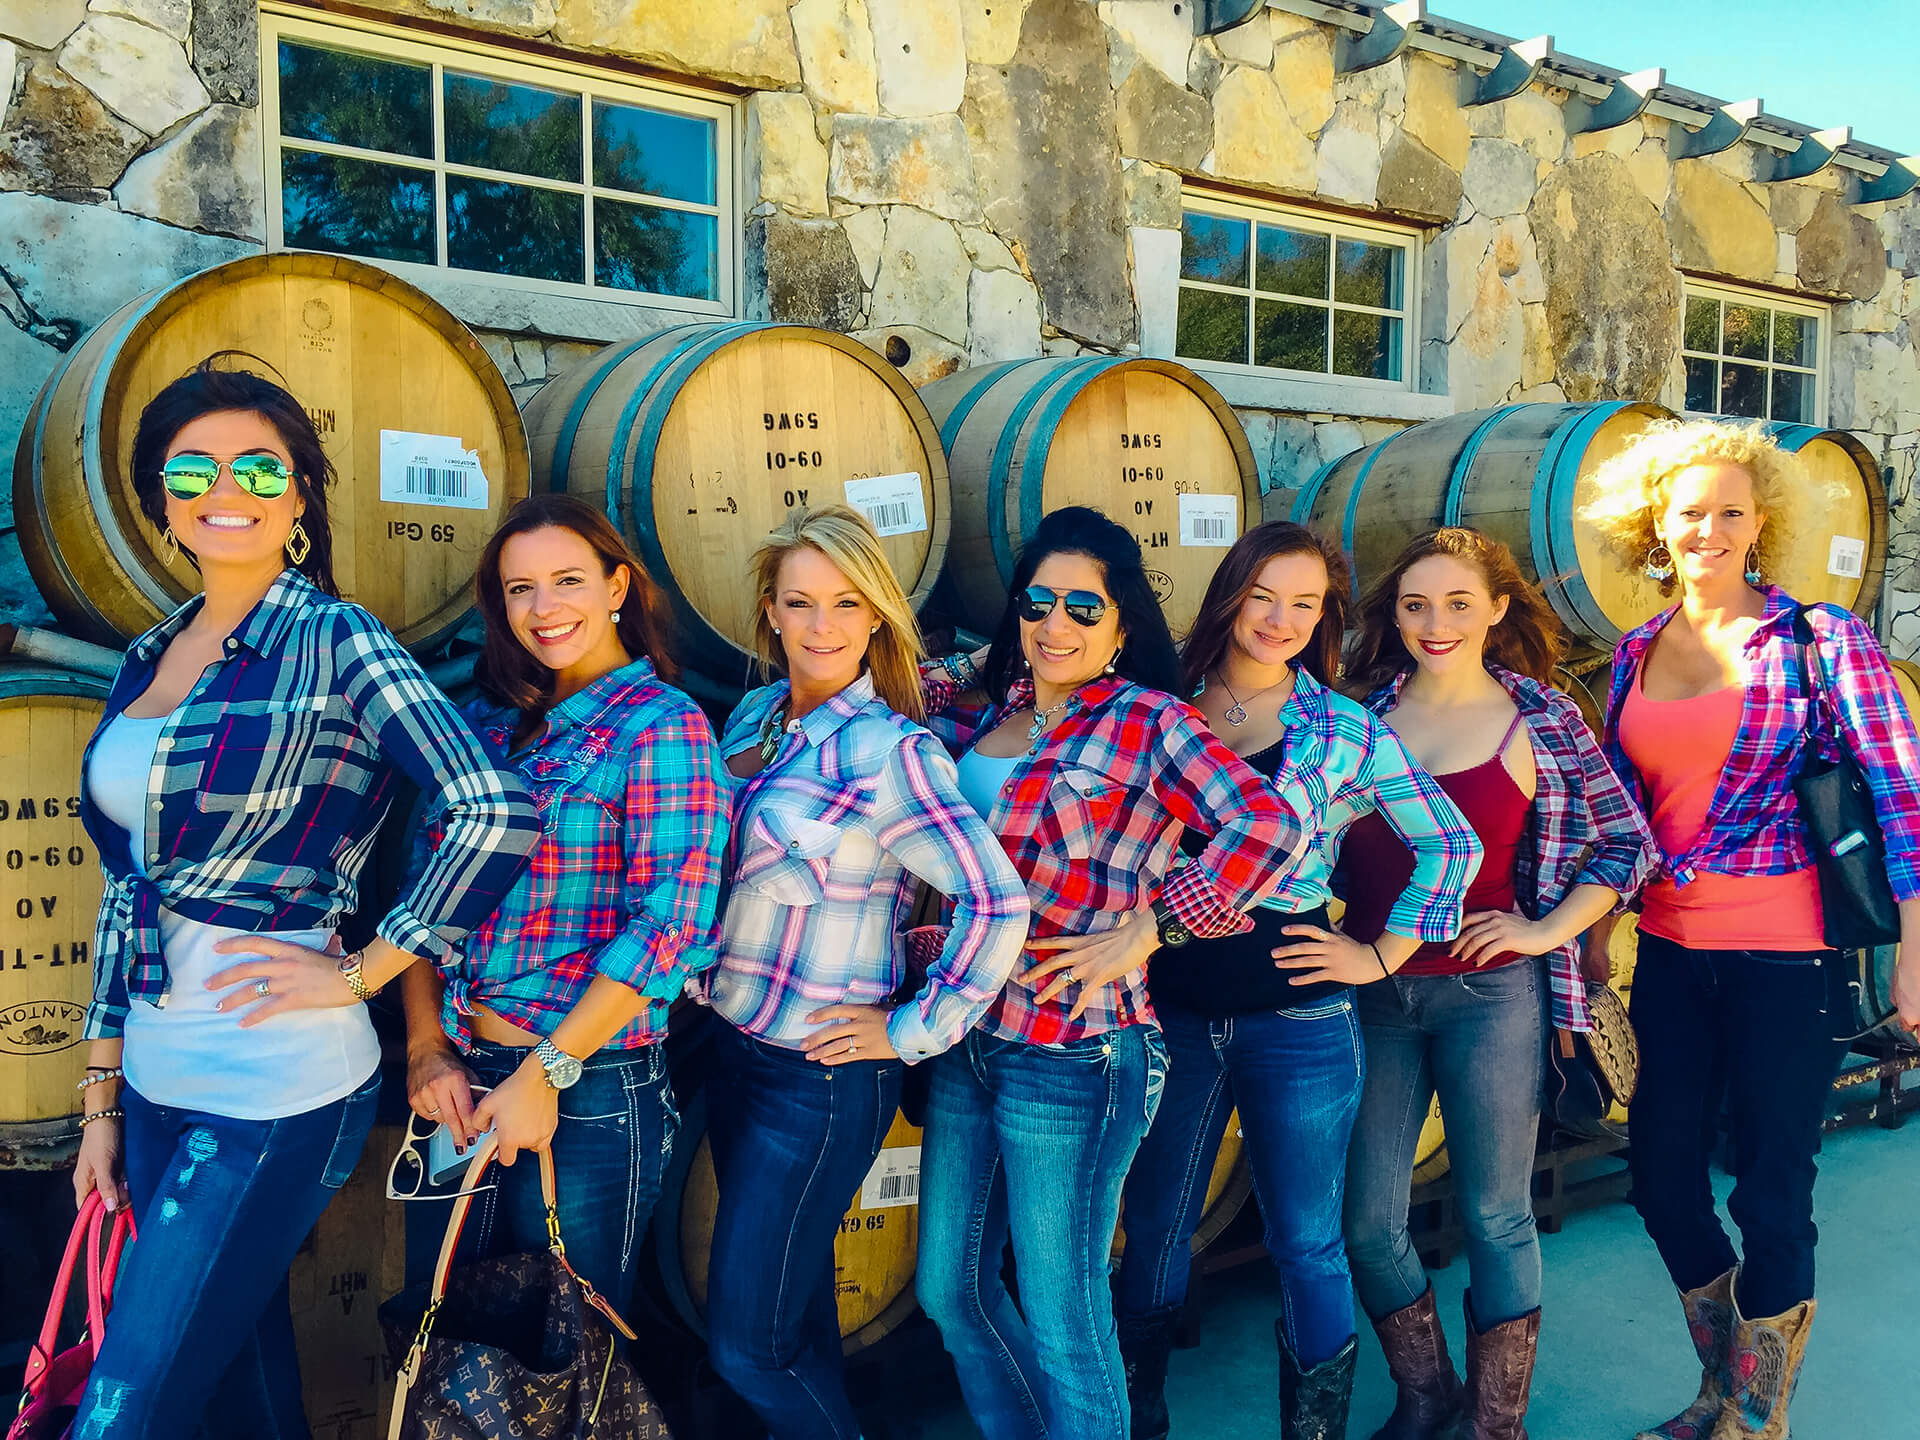 hill country wine tours austin